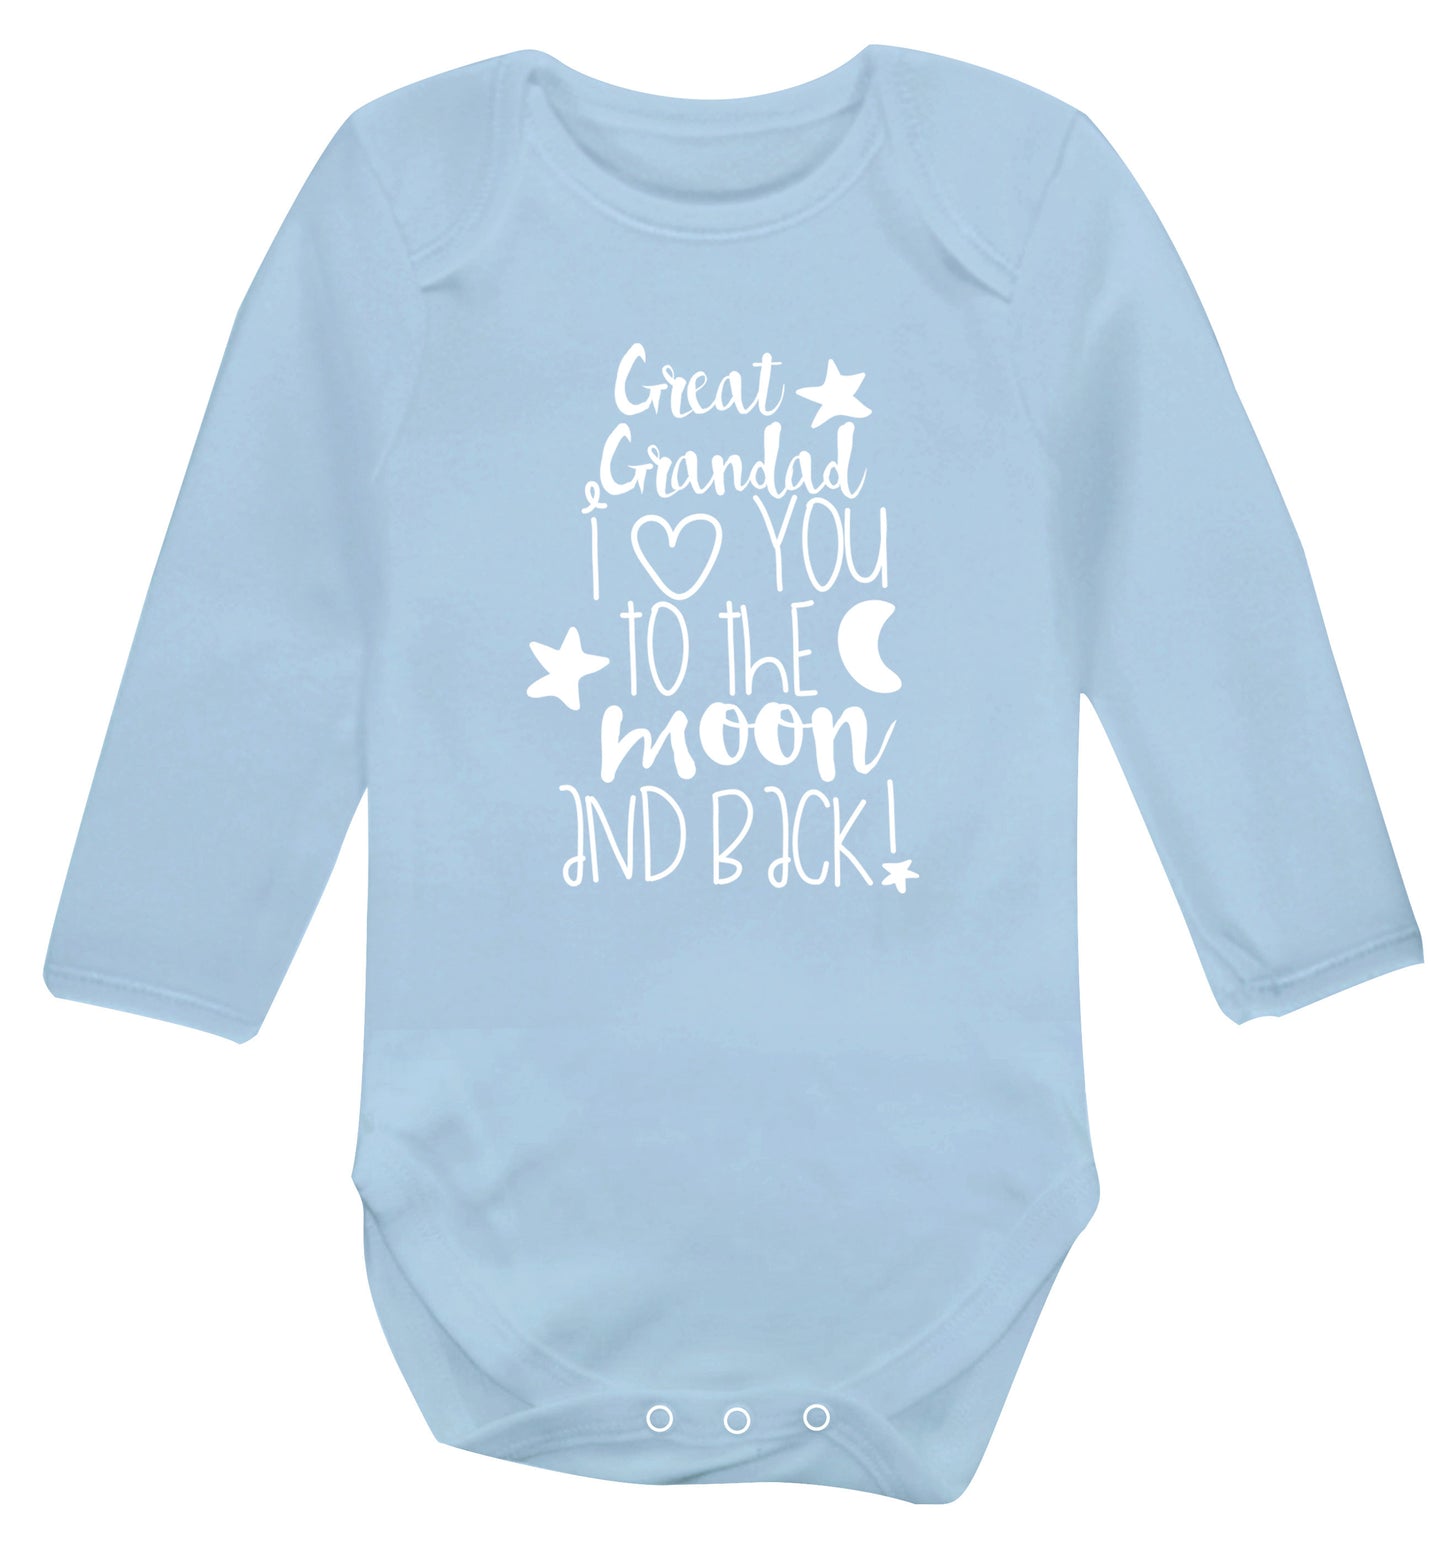 Great Grandad I love you to the moon and back Baby Vest long sleeved pale blue 6-12 months